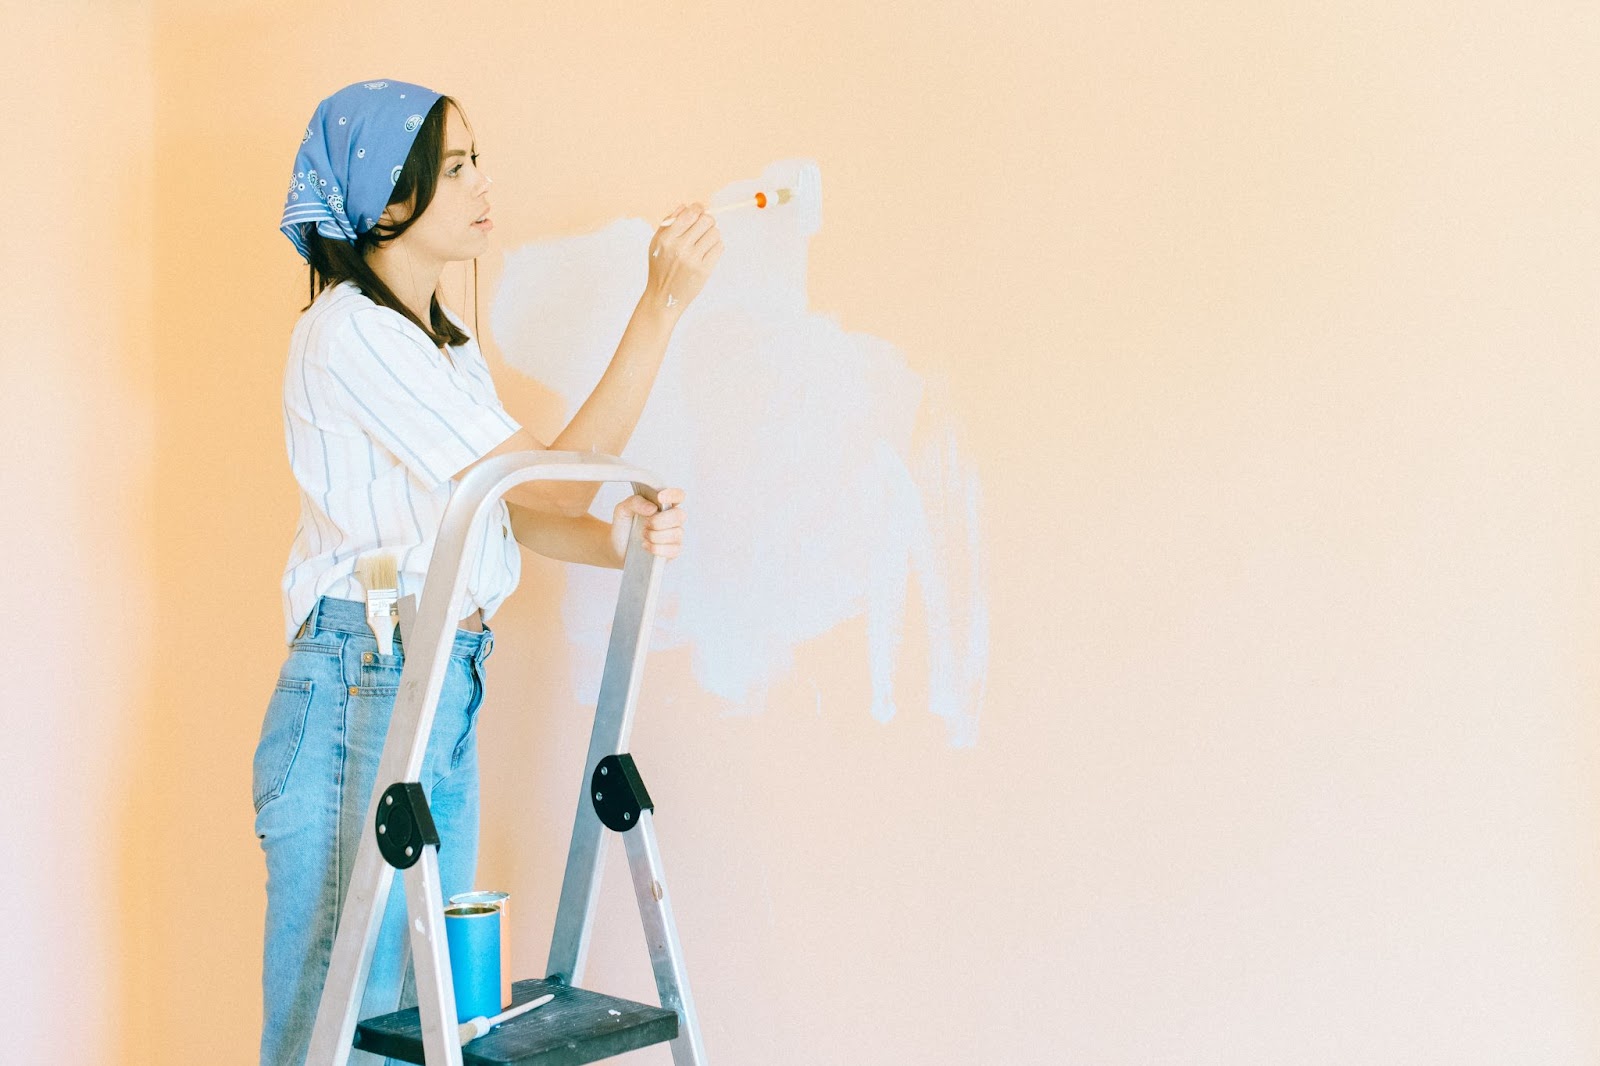 Woman painting on a step ladder, hire a professional 